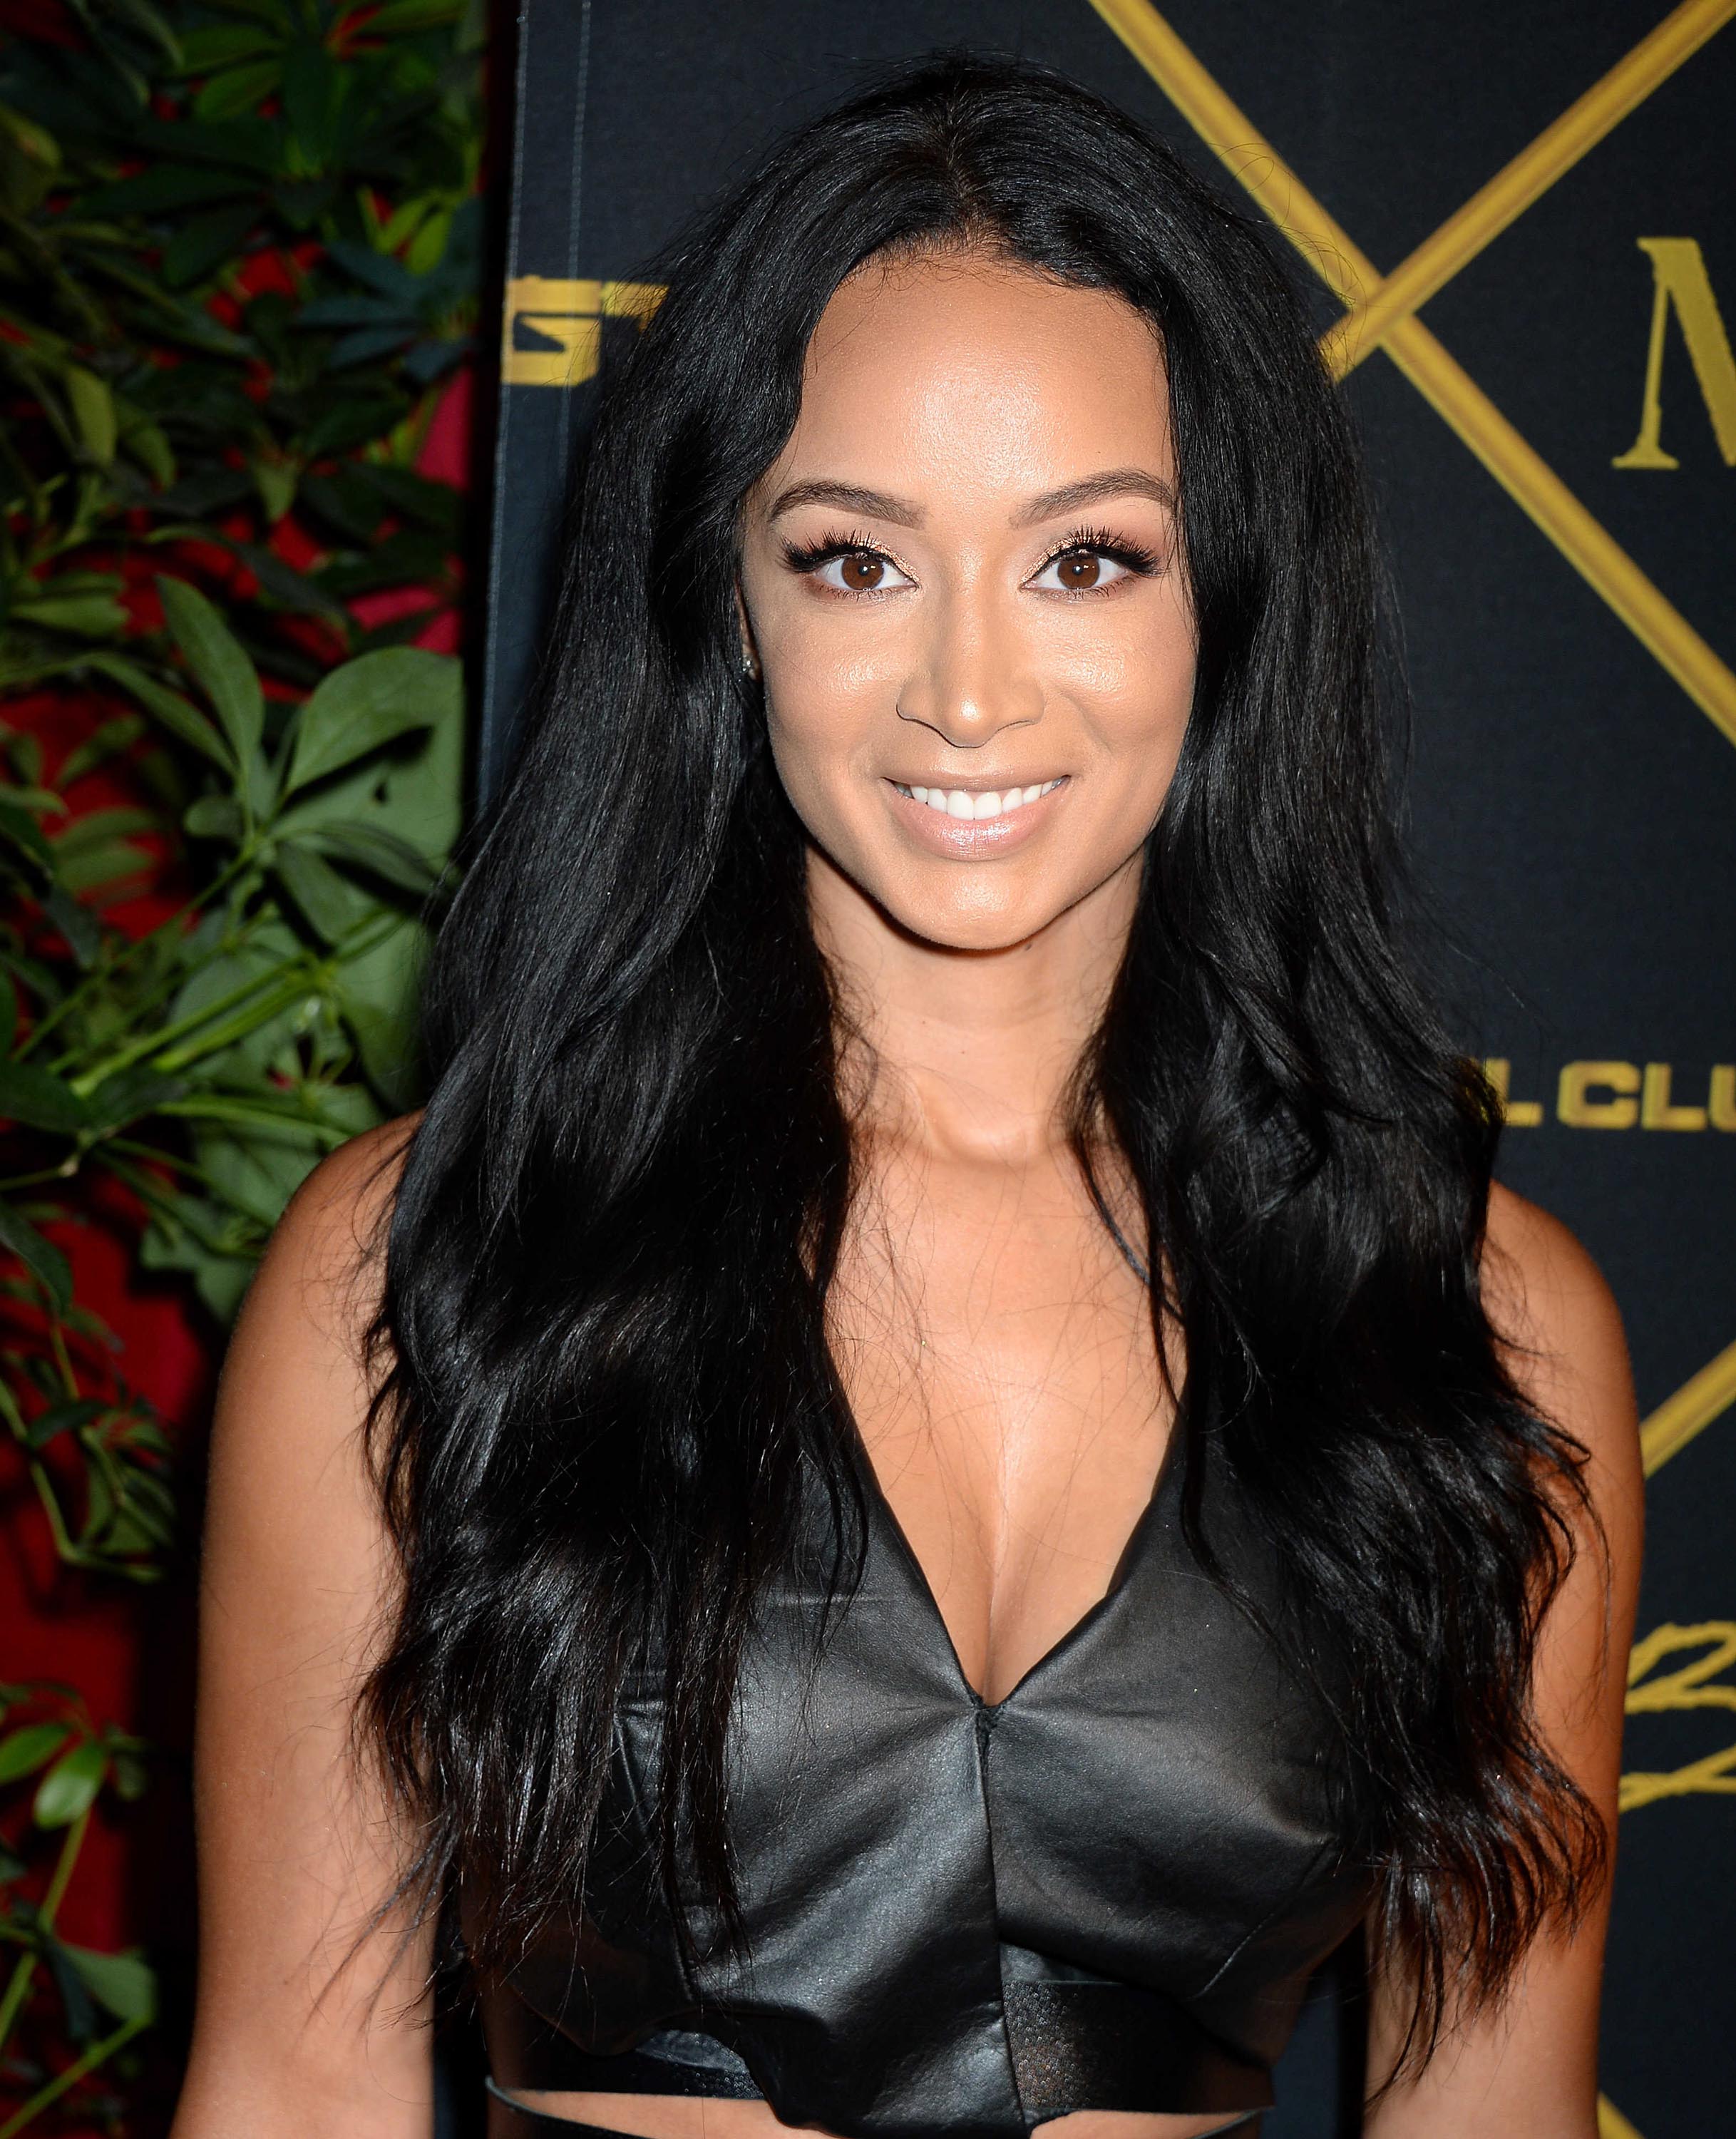 Draya Michele attends the 2016 MAXIM Hot 100 Party